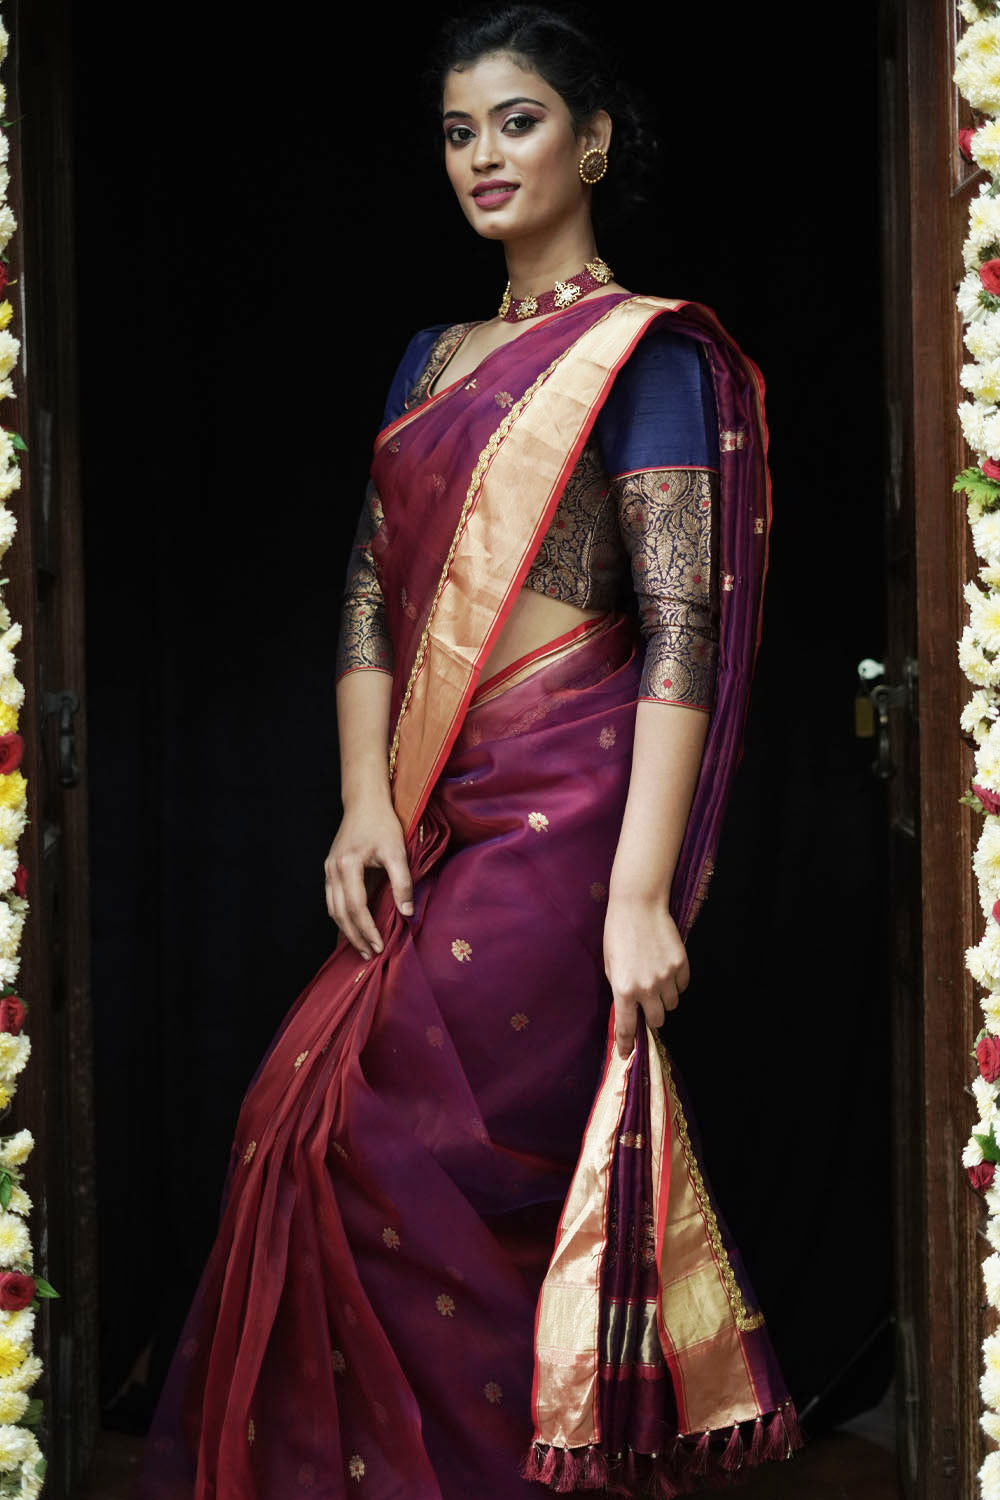 Plum coloured pure chanderi saree with gold zari buttis and gold tissue border with gold lace.